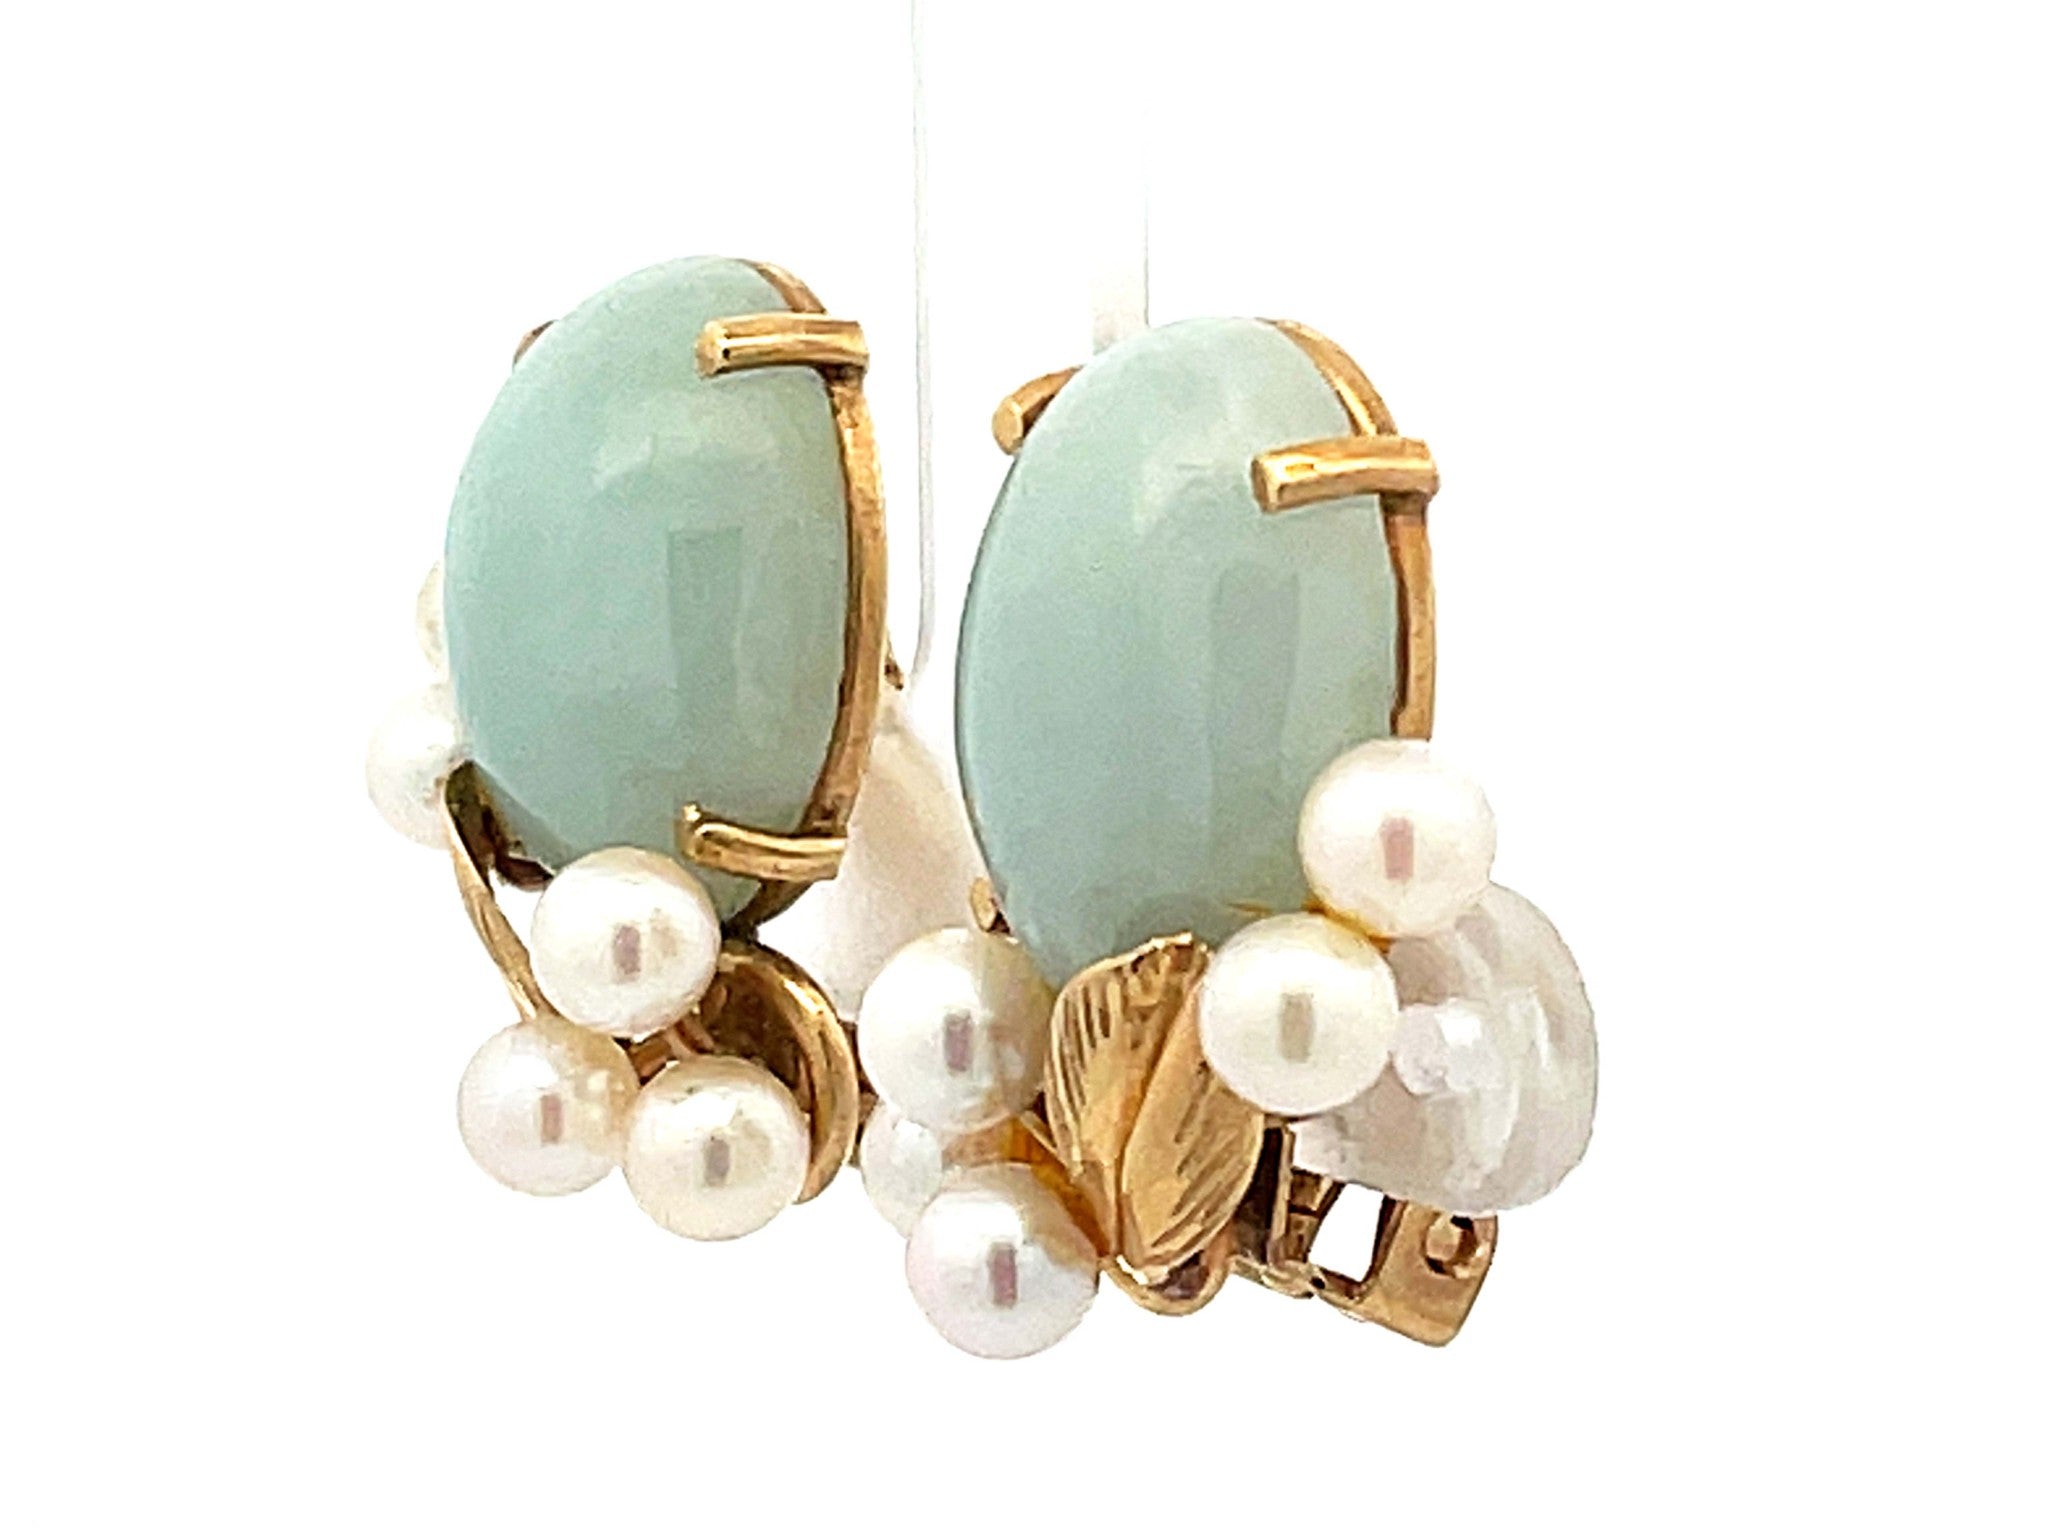 Mings Cabochon Jade and Pearl Clip on Earrings in 14k Yellow Gold